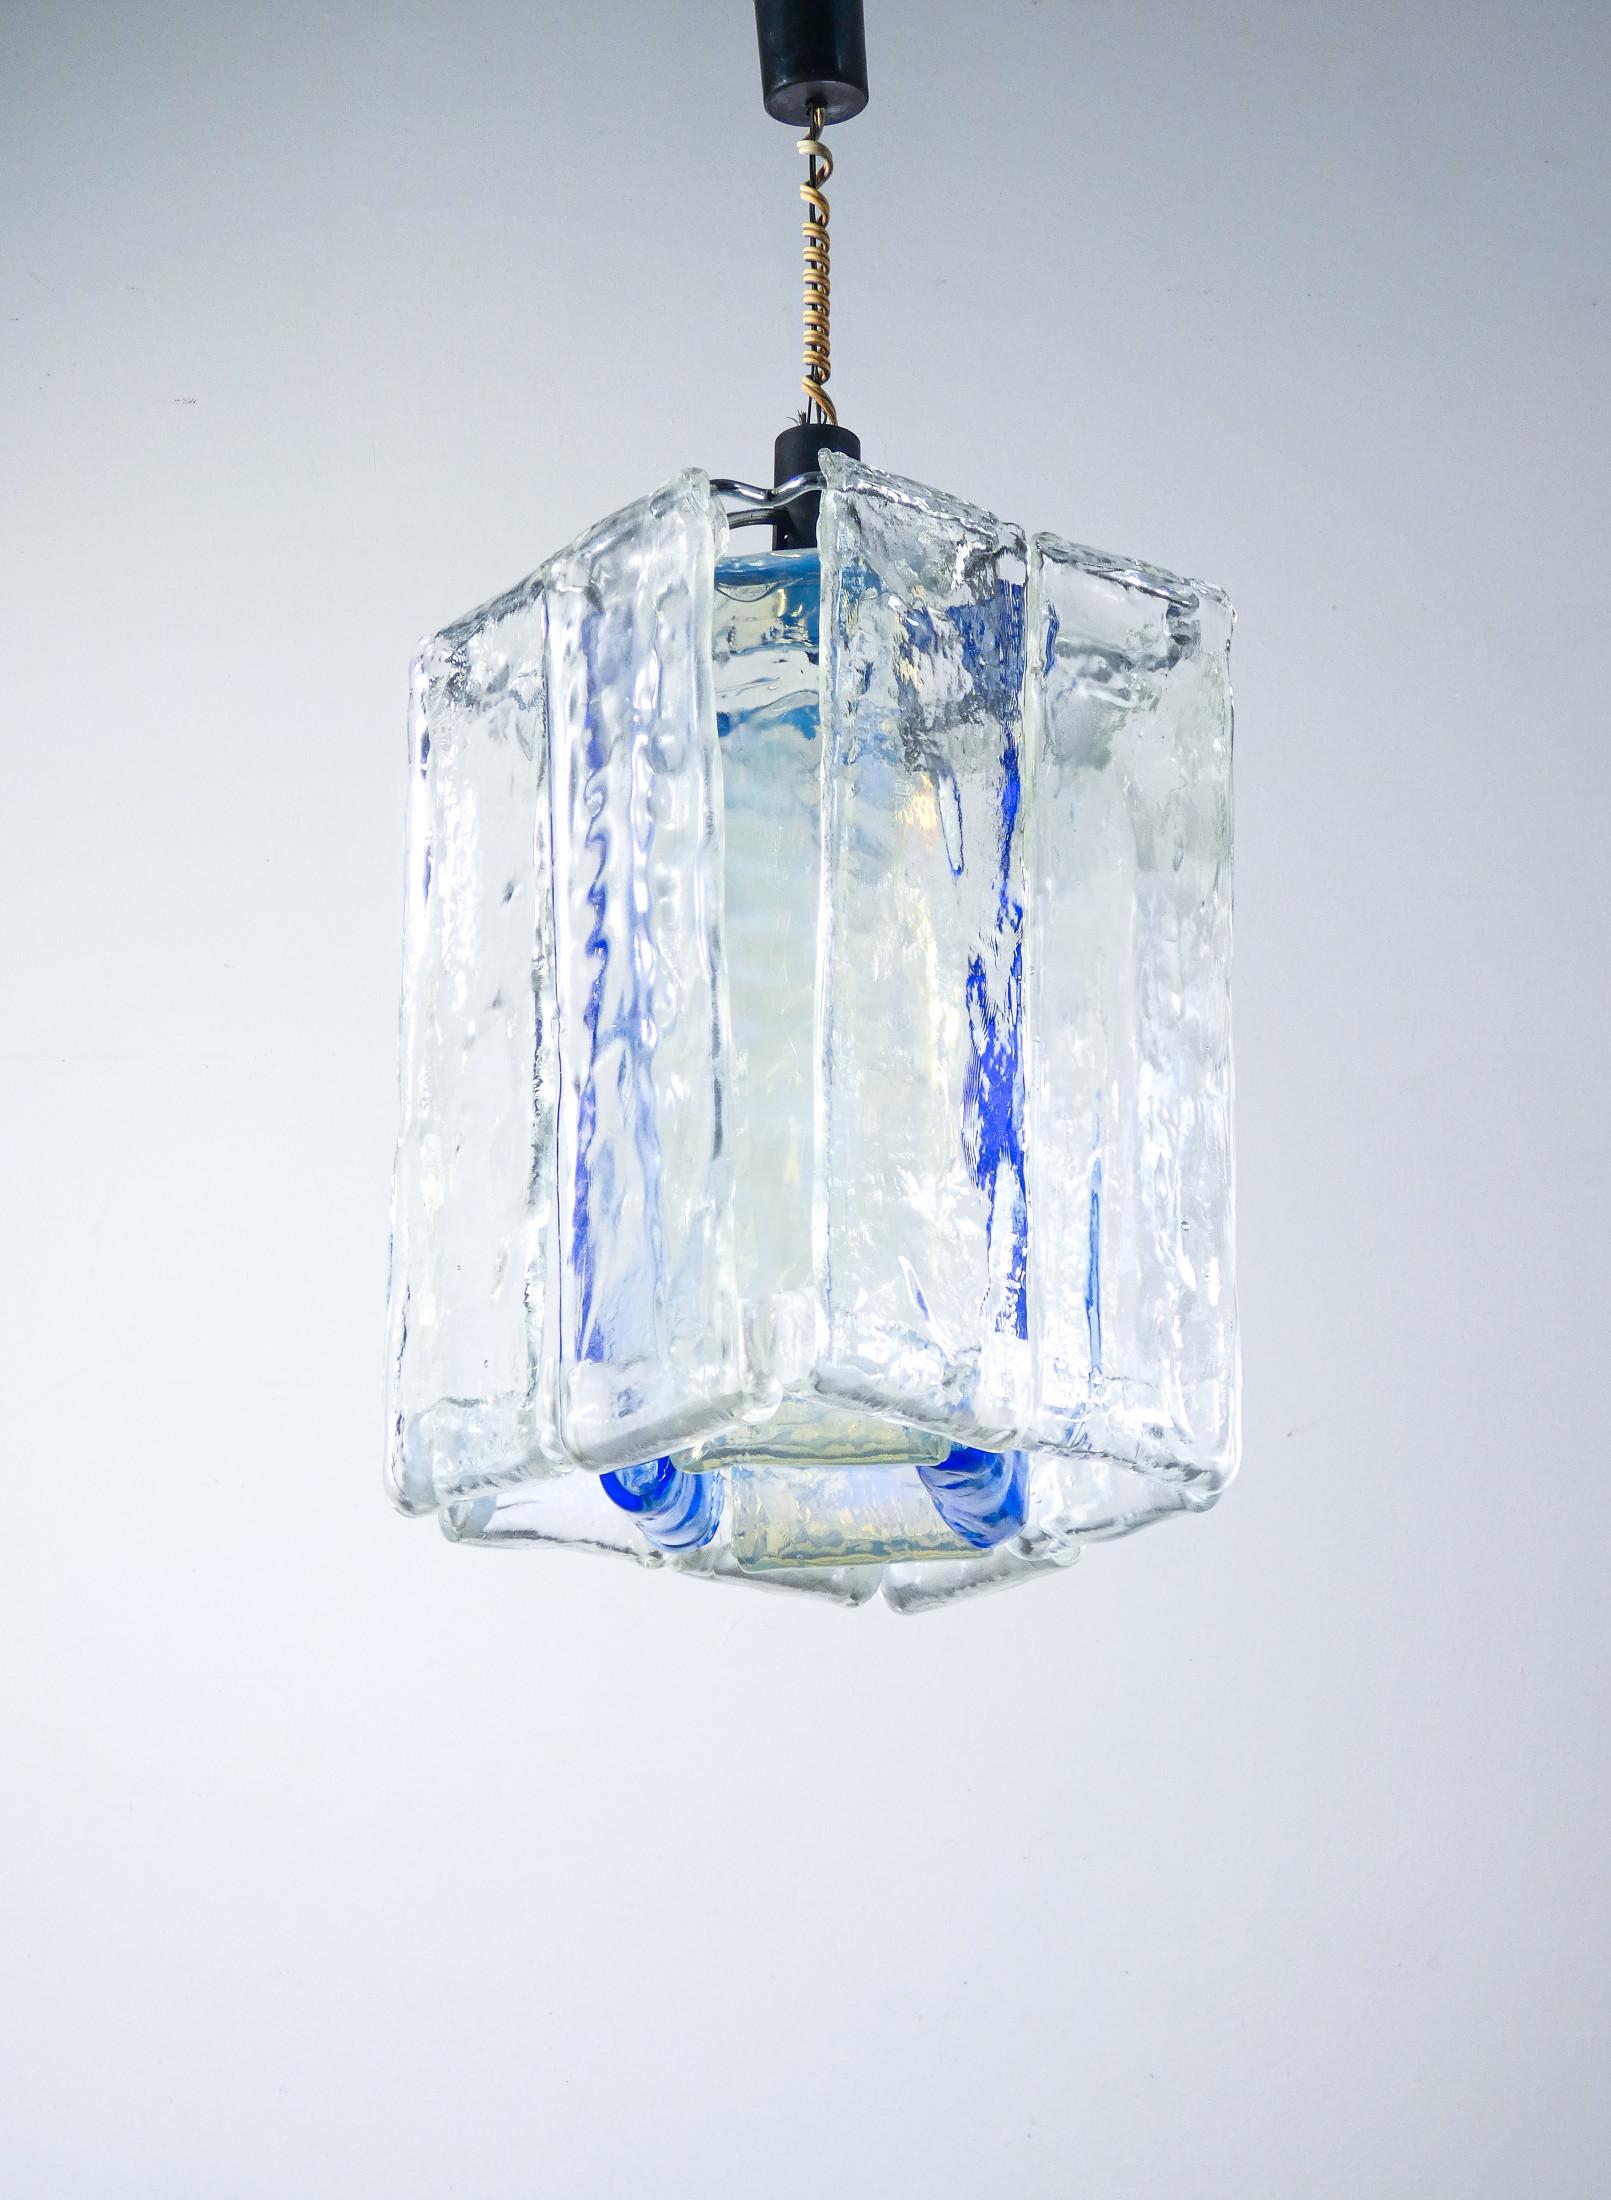 Chandelier
design F.lli TOSO,
with diffuser elements
glass sectionals
blown in three colors.

ORIGIN
Murano, Italy

PERIOD
1970 ca.

DESIGNER
F.lli TOSO

MATERIALS
Metal frame, blown glass diffuser elements in three colors: clear, iridescent and